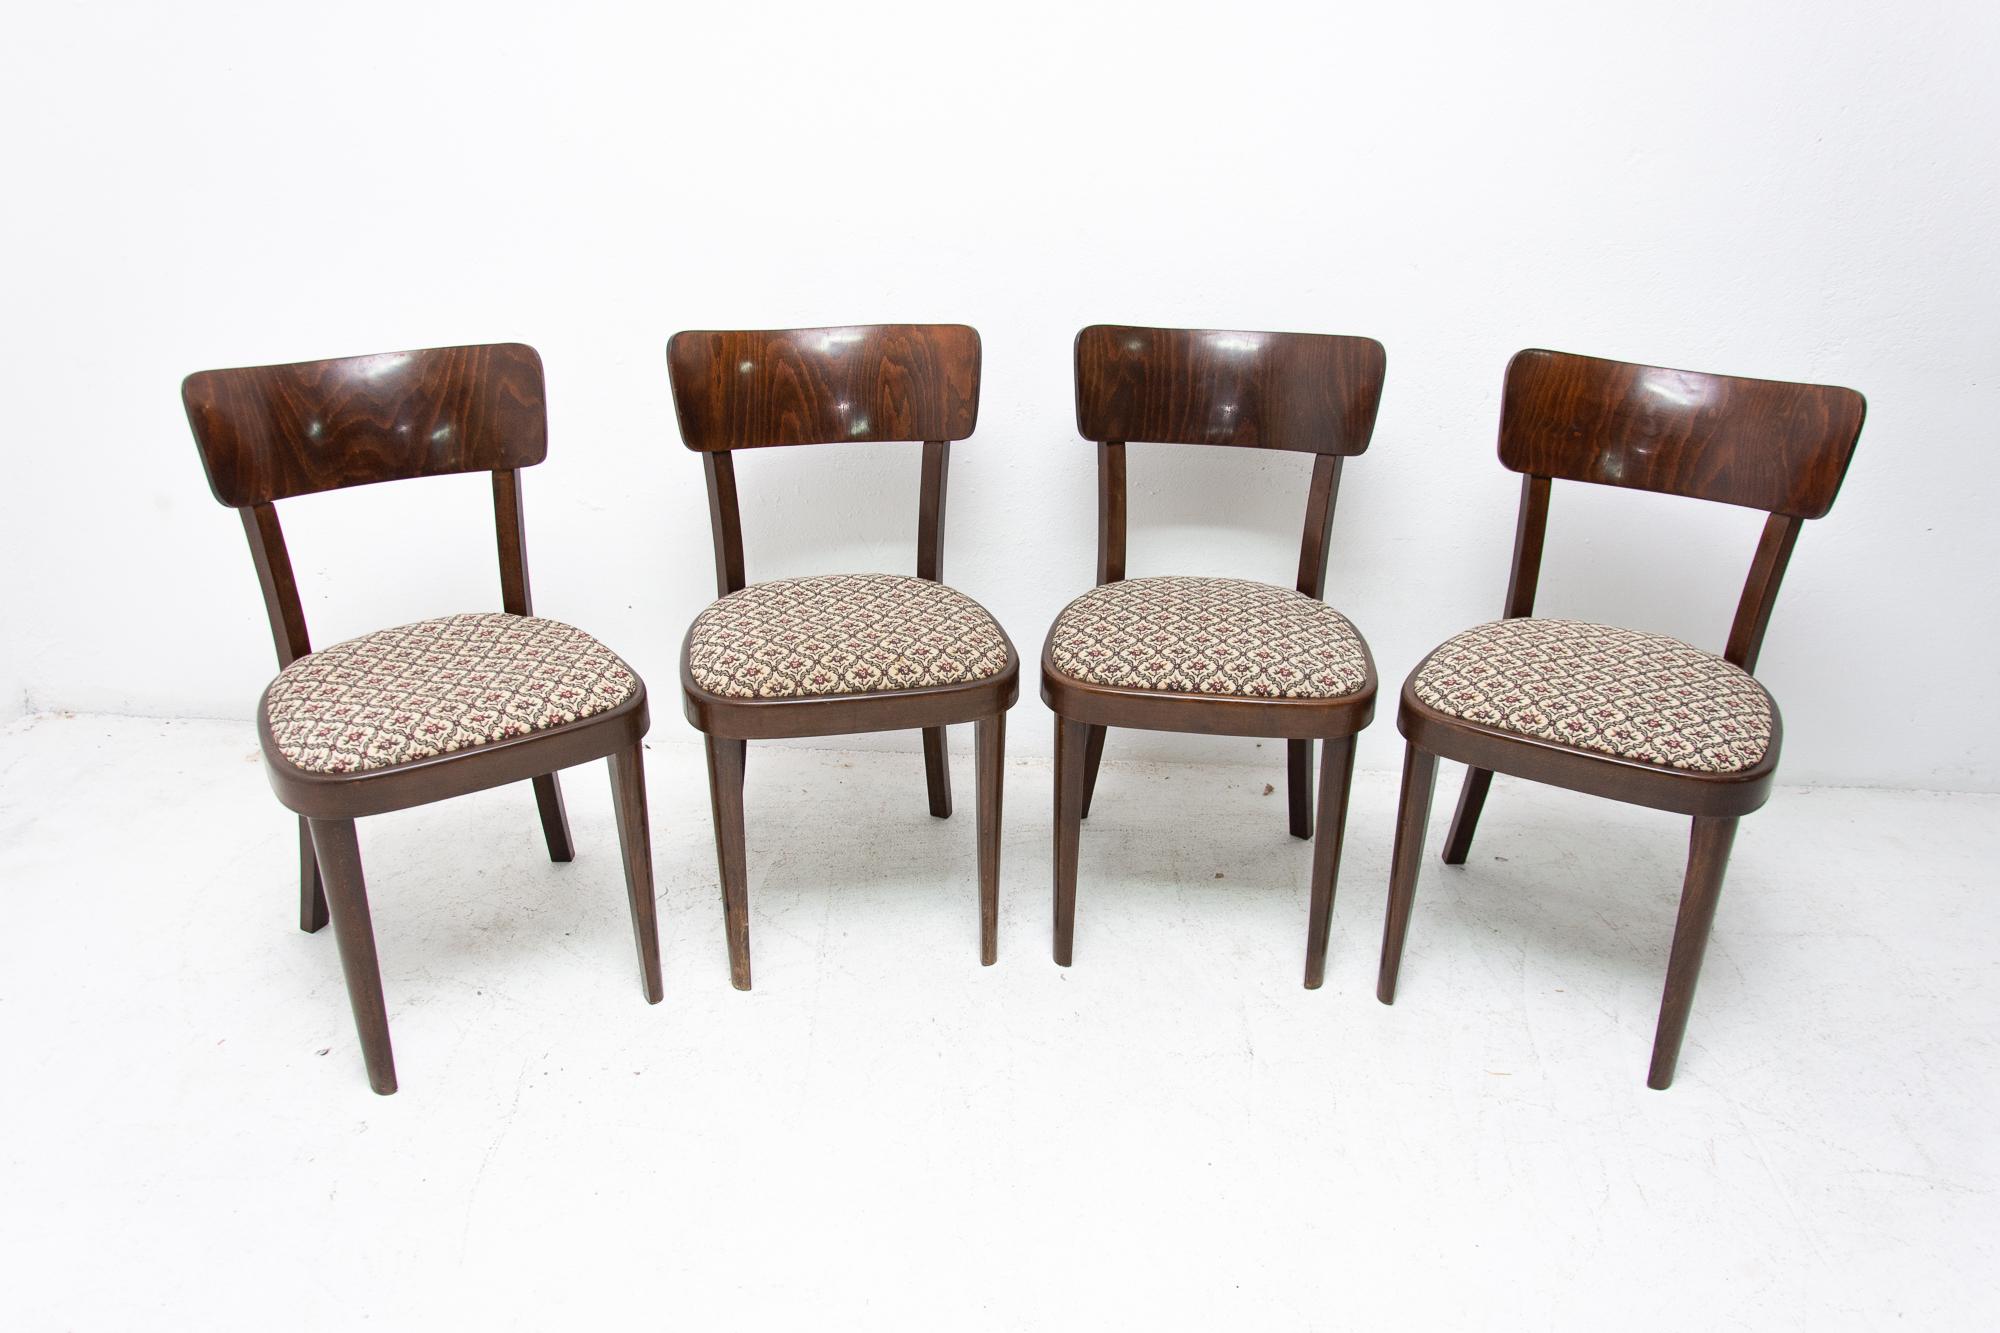 Dining chairs Thonet, made in Czechoslovakia, 1950s. Walnut veneer, upholstered seats. In very good Vintage condition, with wear appropriate for the age of chairs. Price is for the set of four.